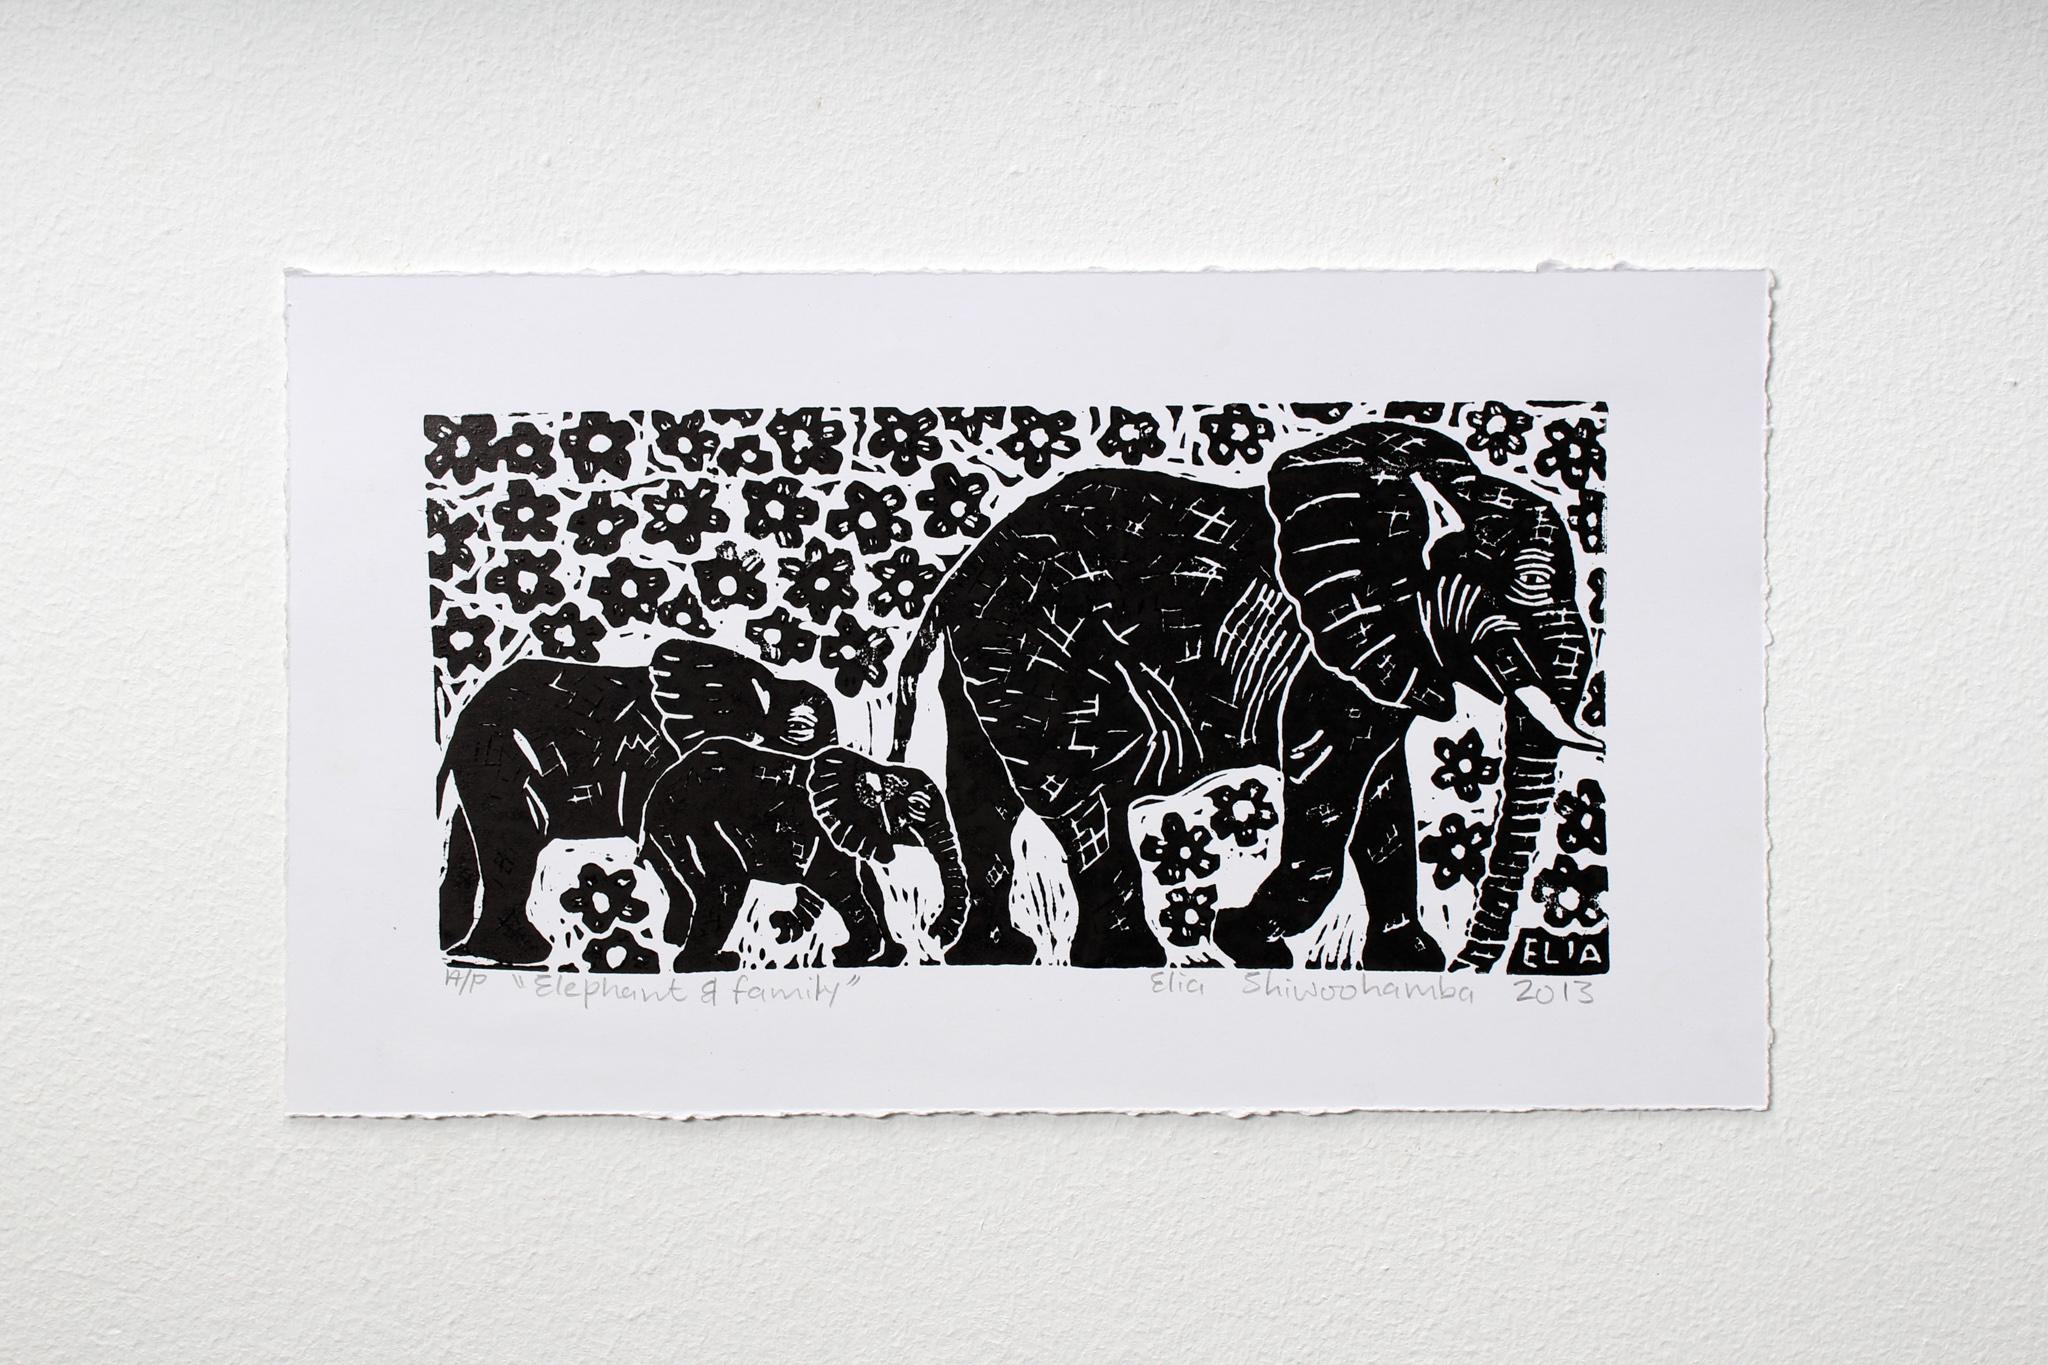 Elephant and family, 2013. Linoleum block print on paper. Unlimited edition. 

Elia Shiwoohamba was born in 1981 in Windhoek, Namibia. He graduated from the John Muafangejo Art Centre in Windhoek in 2006. Specialising in printmaking and sculpture,